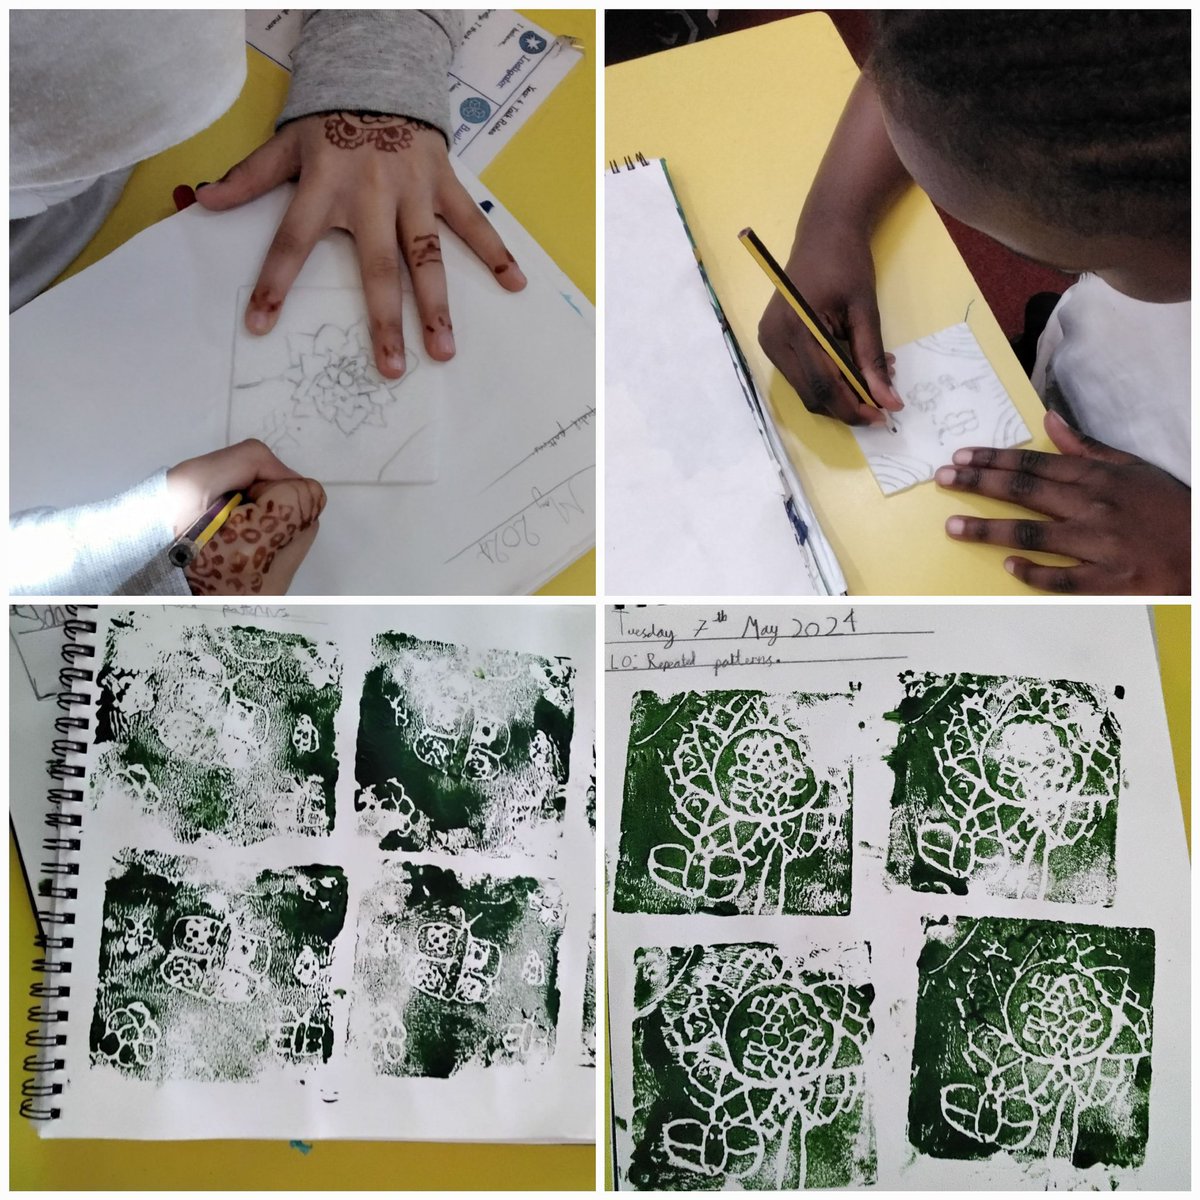 For Art, Year 4 created a repeated pattern using a paint print method. They created their design pattern on a Styrofoam block and used a roller to paint and transfer the image repeatedly in their art books! @leightrustb8 #williammorris #memorymakers